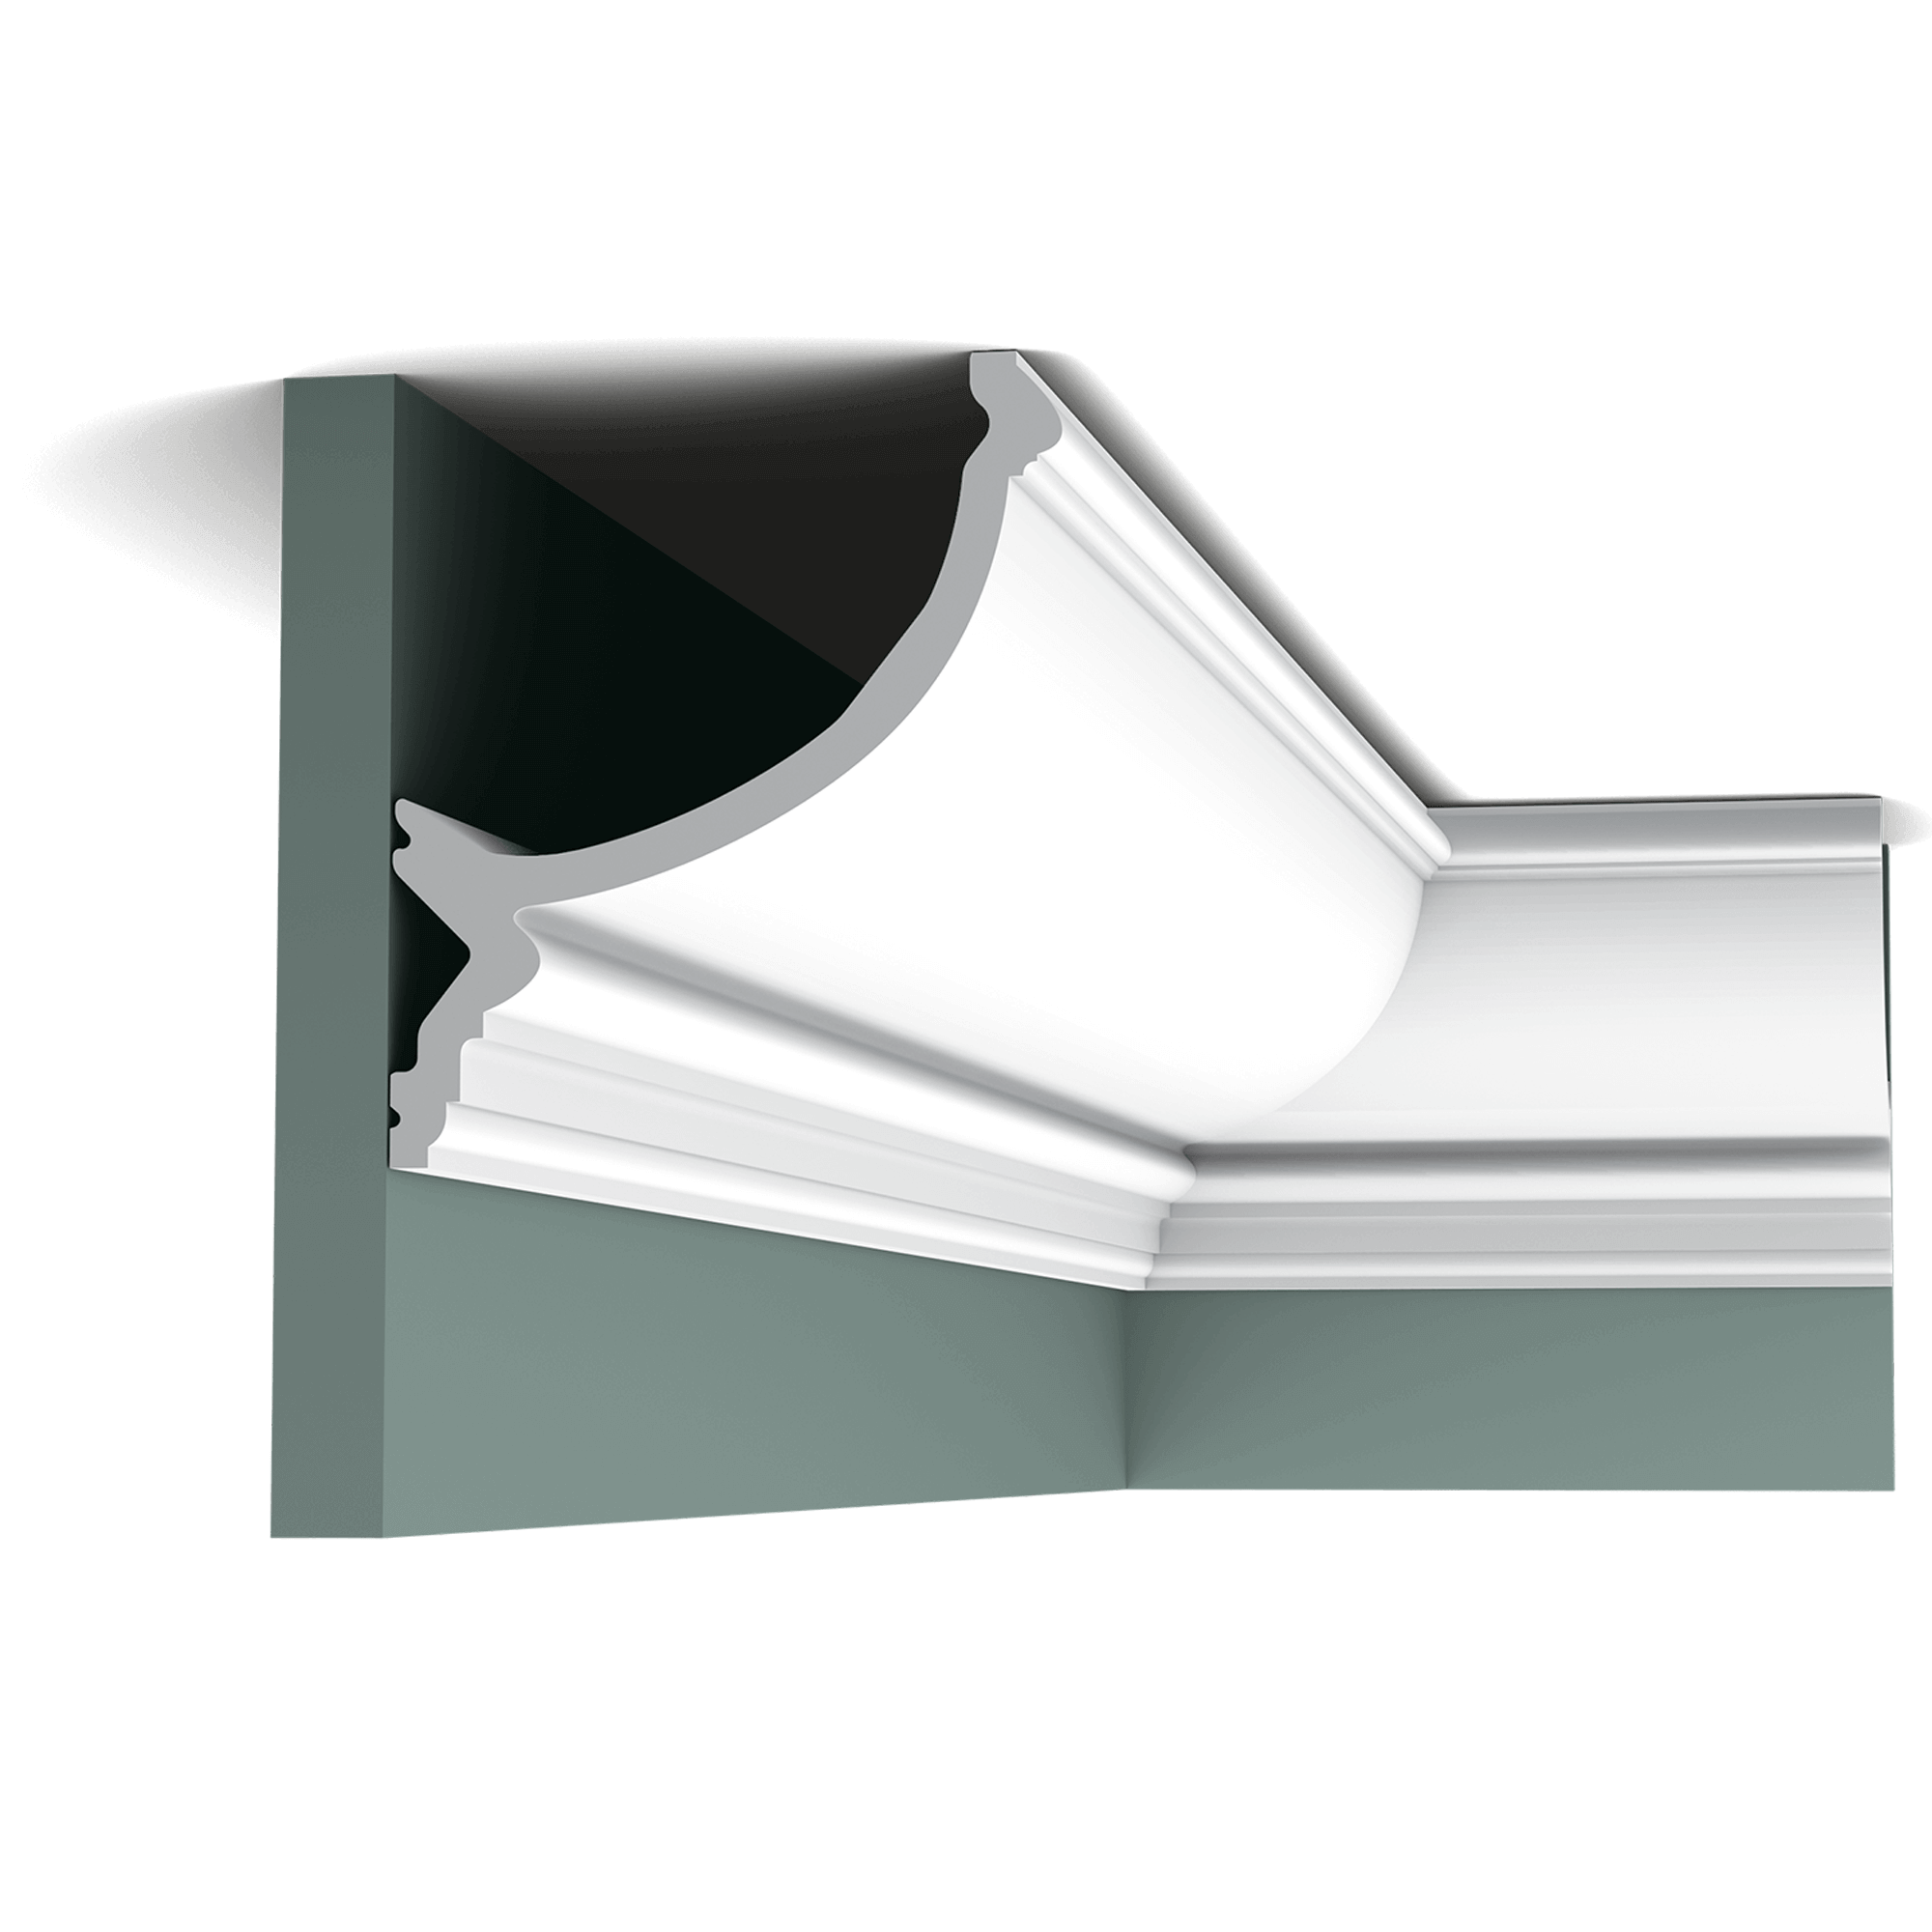 c900 cornice moulding fd13 Large Ovolo-inspired cornice moulding. Fits all types of interiors effortlessly. Installation remark: Use DecoFix Power.